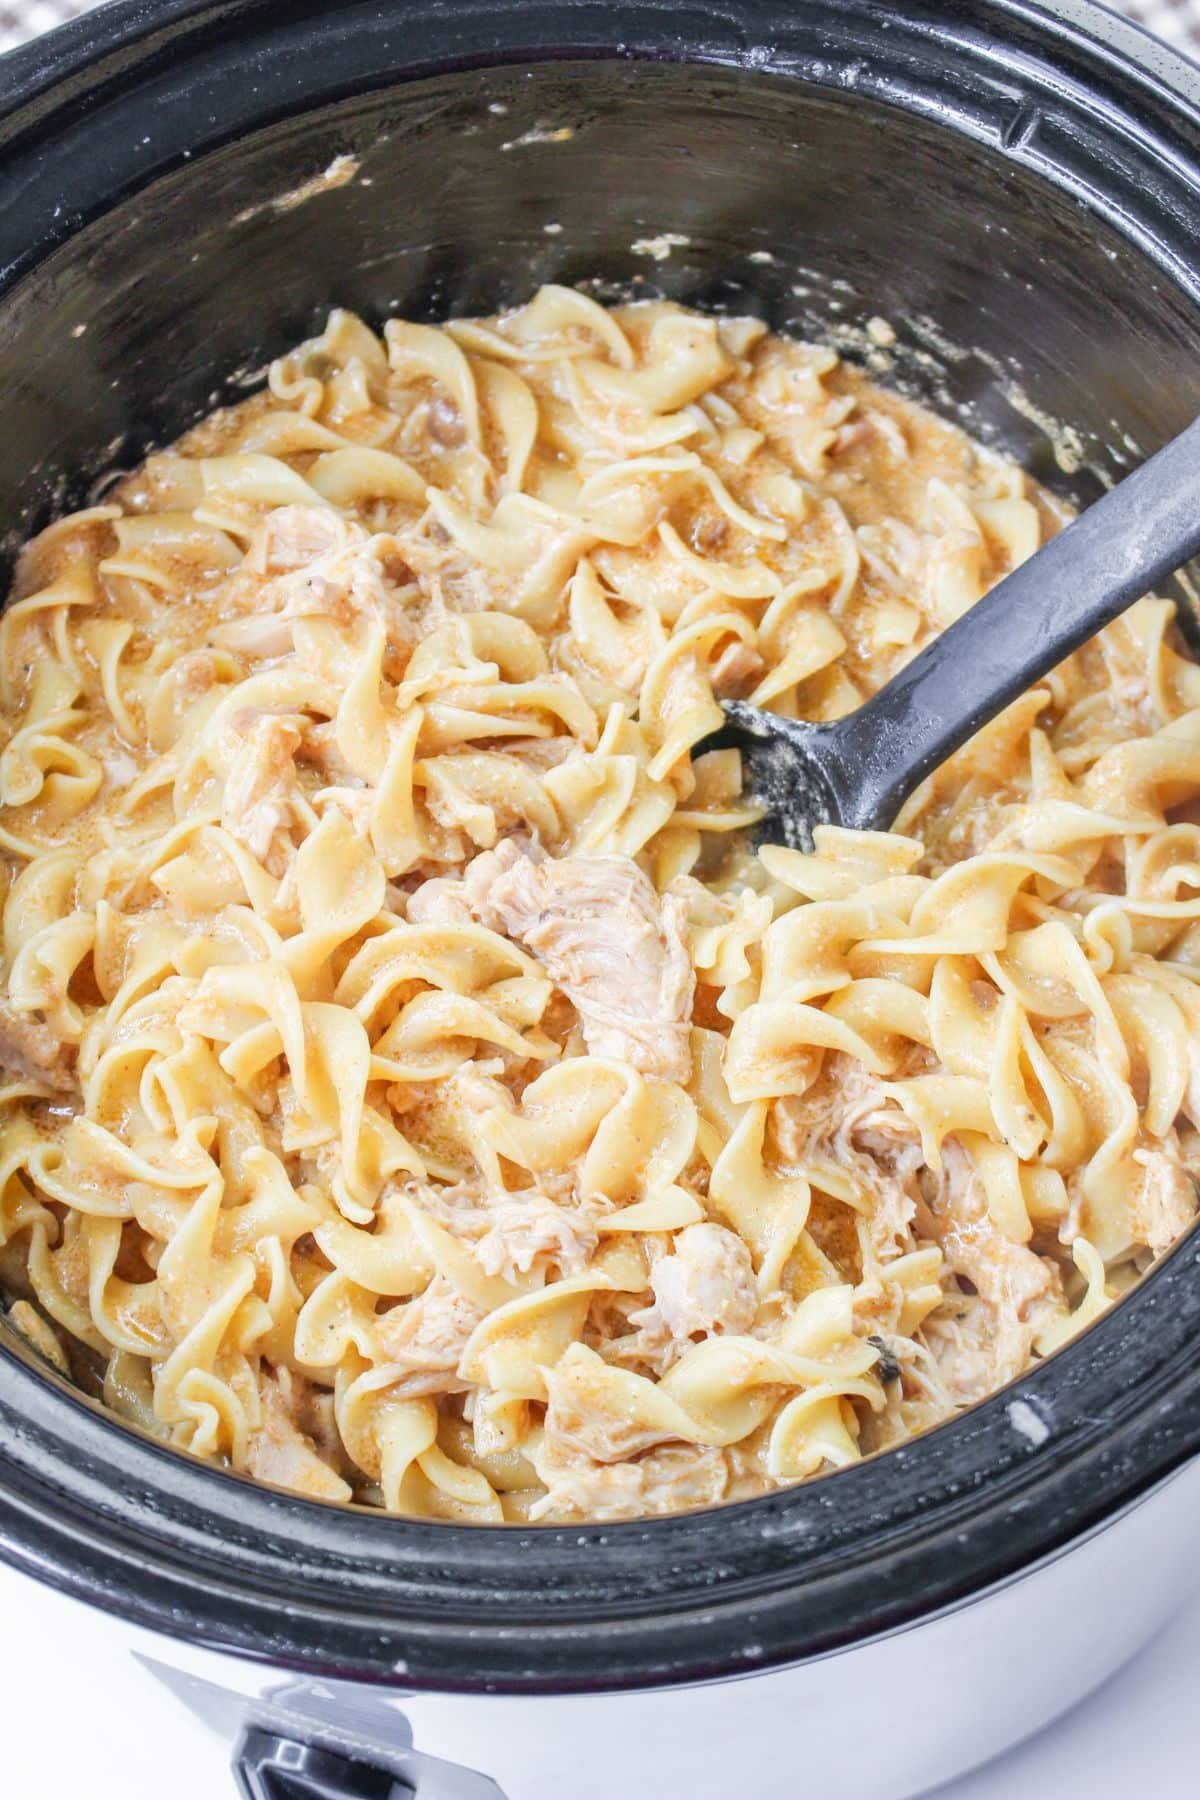 Chicken and noodles in a crockpot.